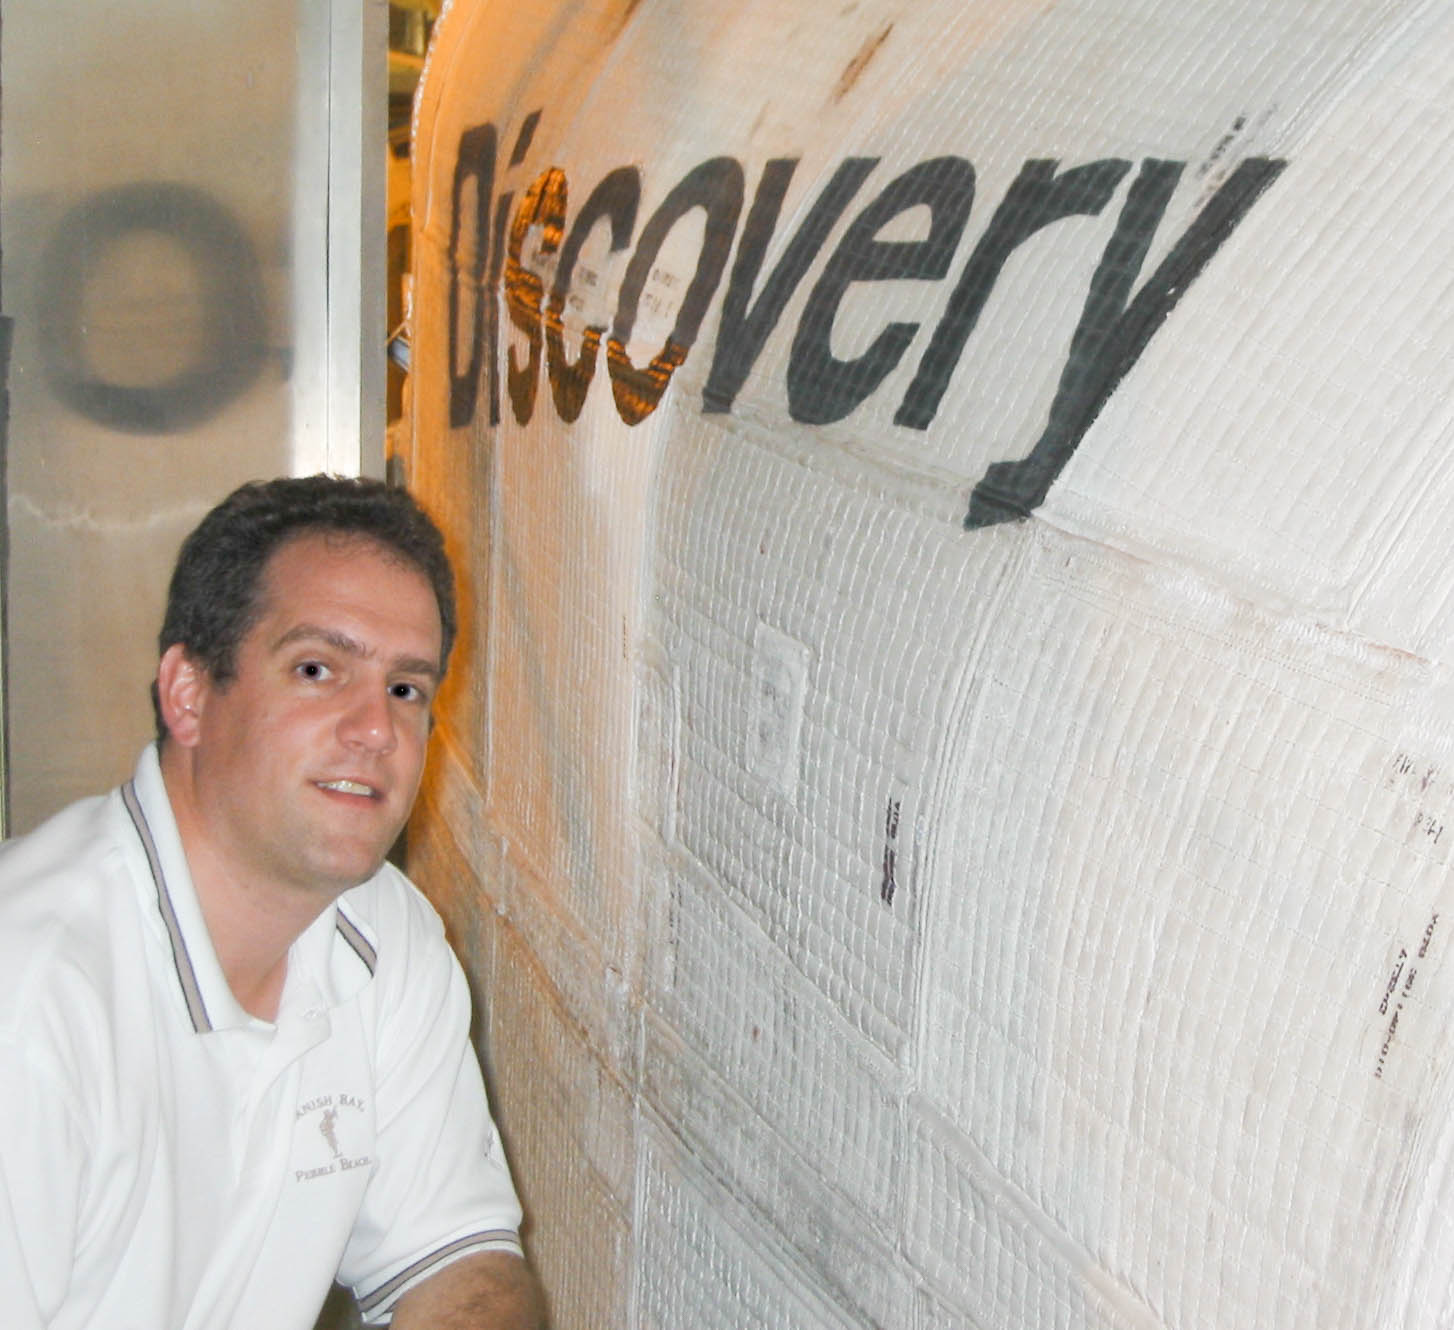 Michael Pryzby poses in front of a rocket, Discovery